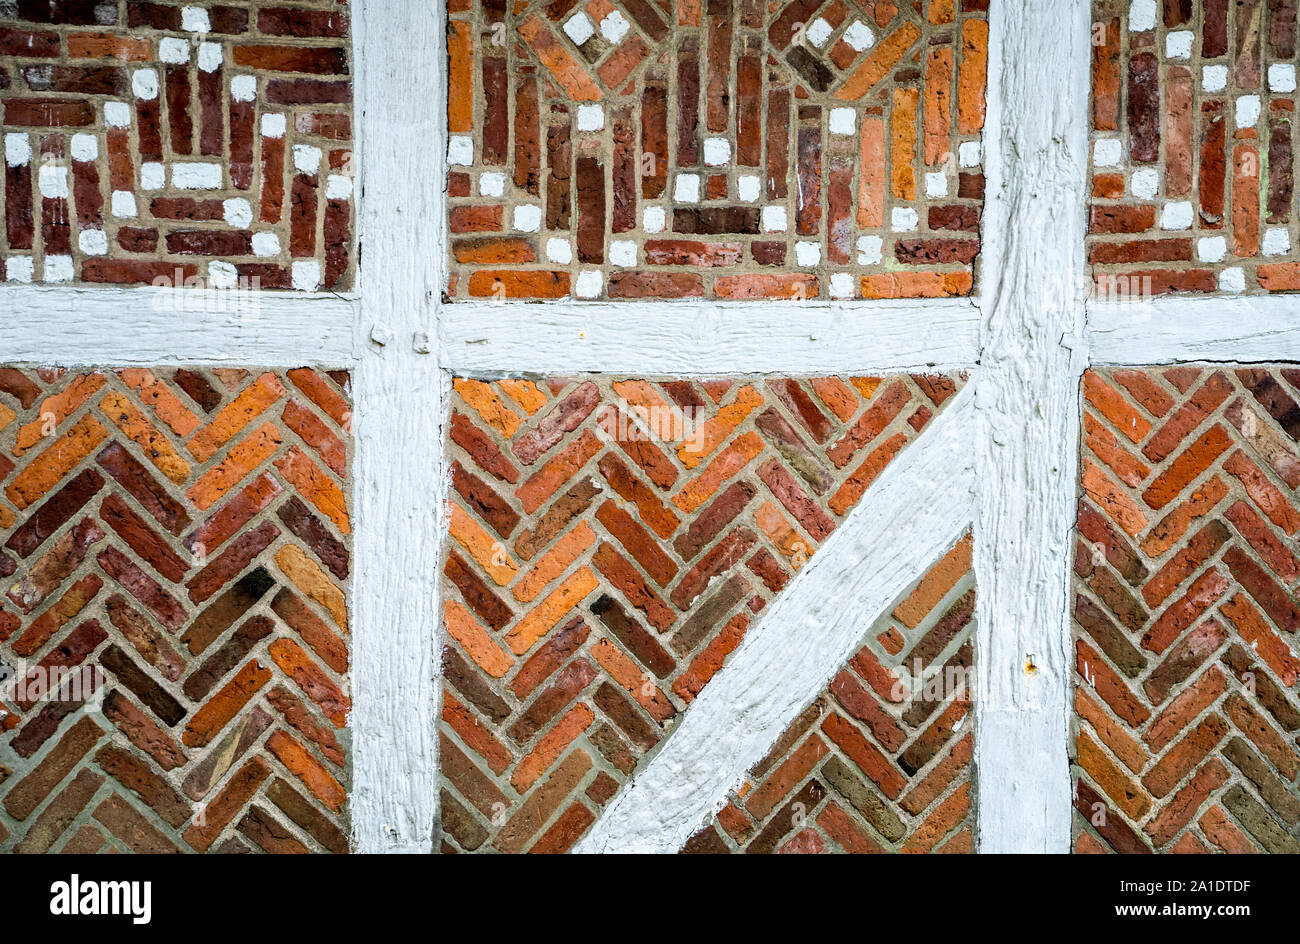 Detail of a historic timber-framed house, Altes Land area, Germany, Europe Stock Photo